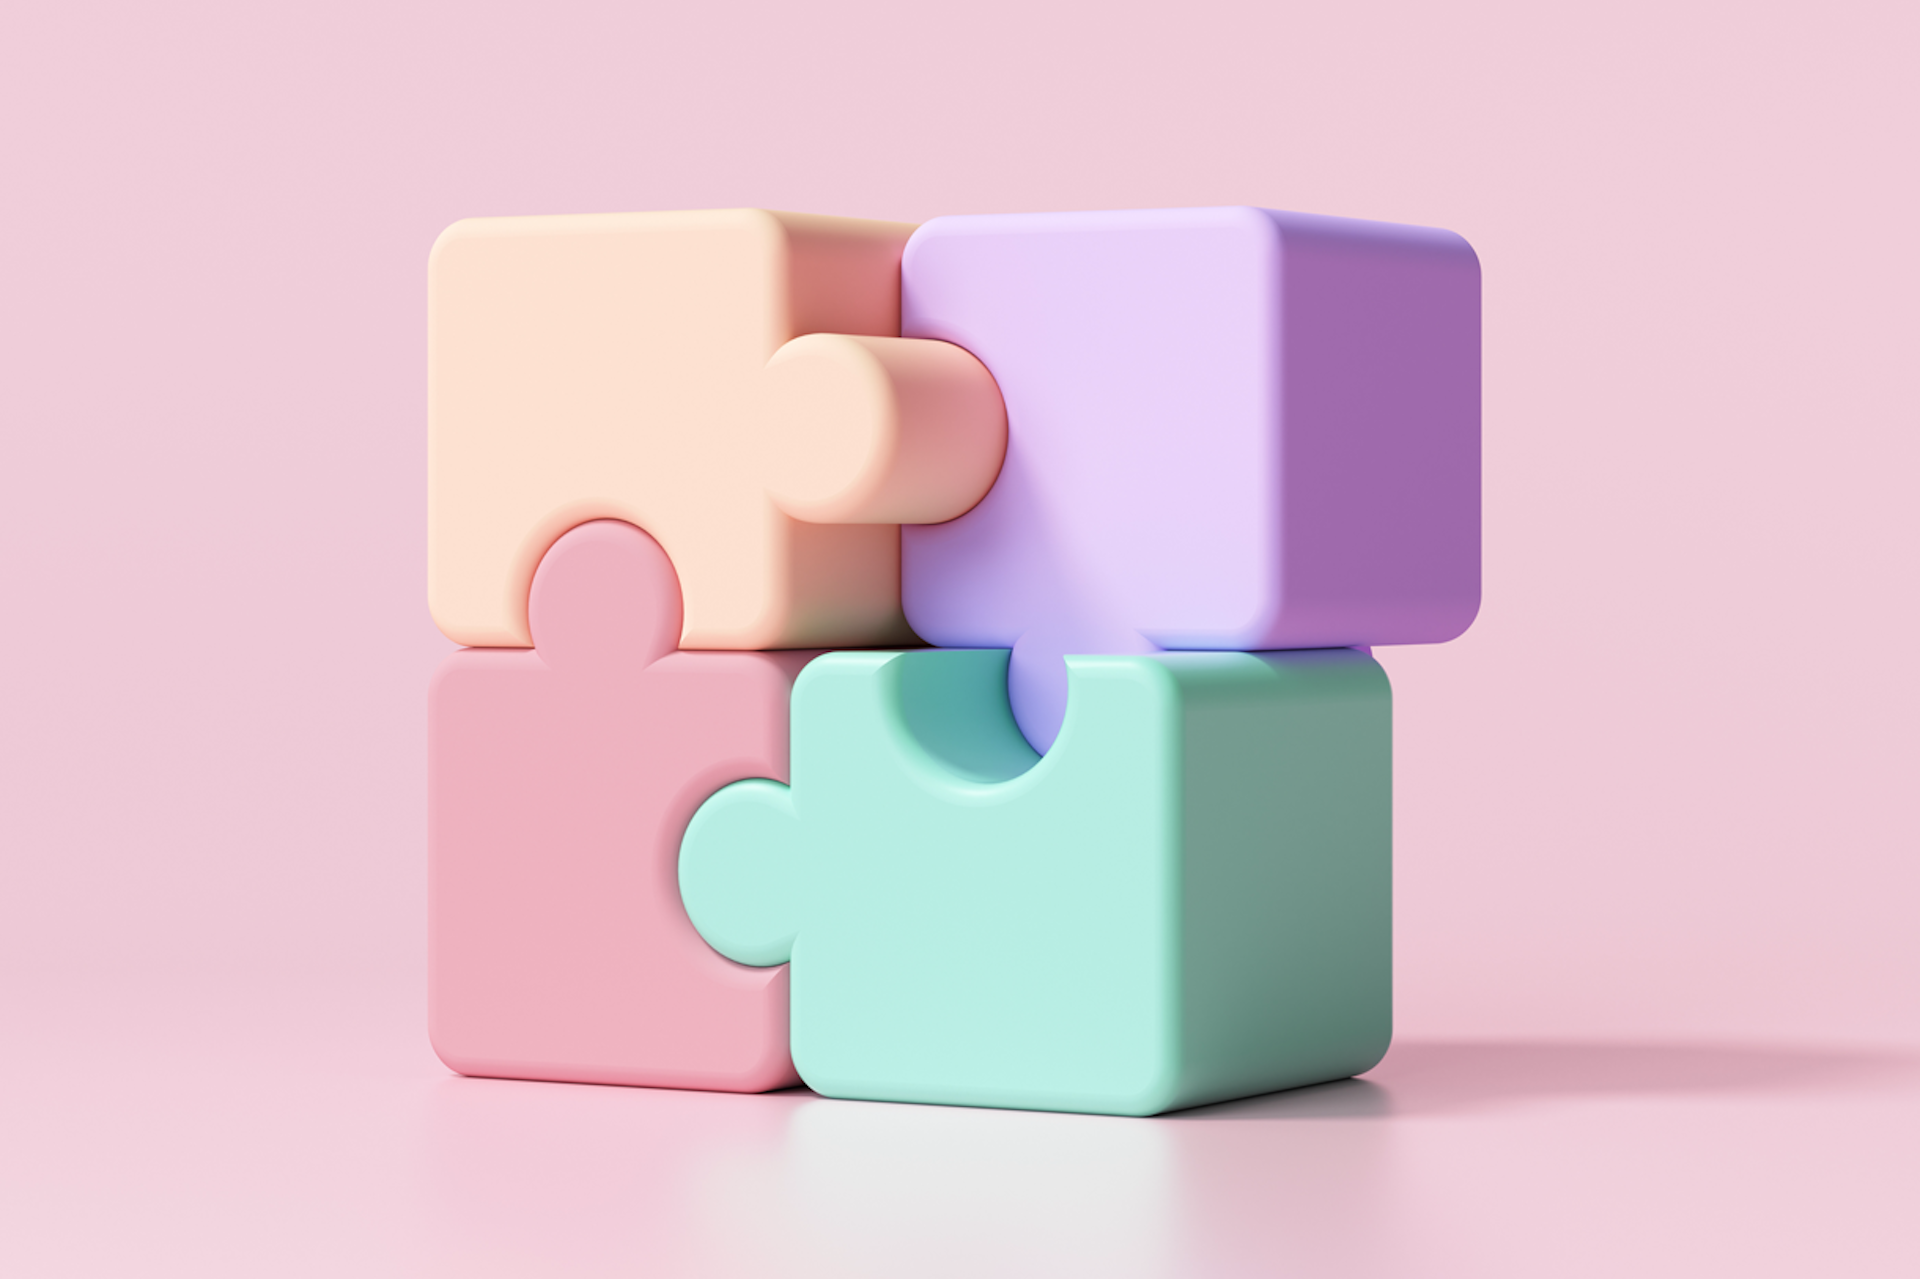 Four puzzle pieces that are all connected, like the perfect team. This image is being used as the header image for a blog that describes How To Build An Effective Team.